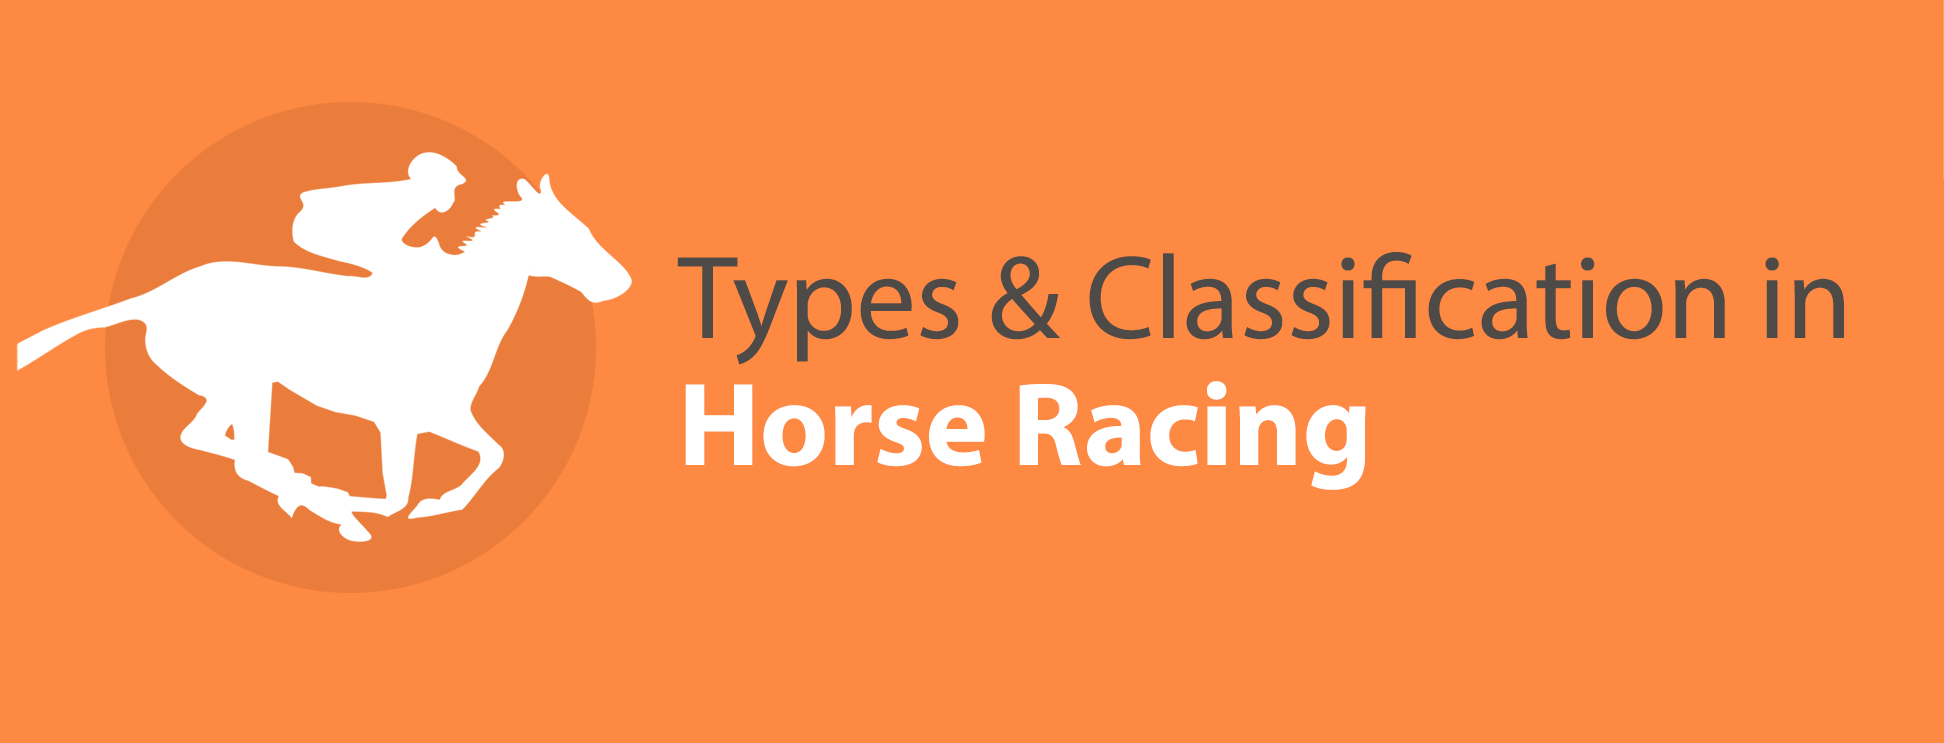 Types & Classification in Horse Racing